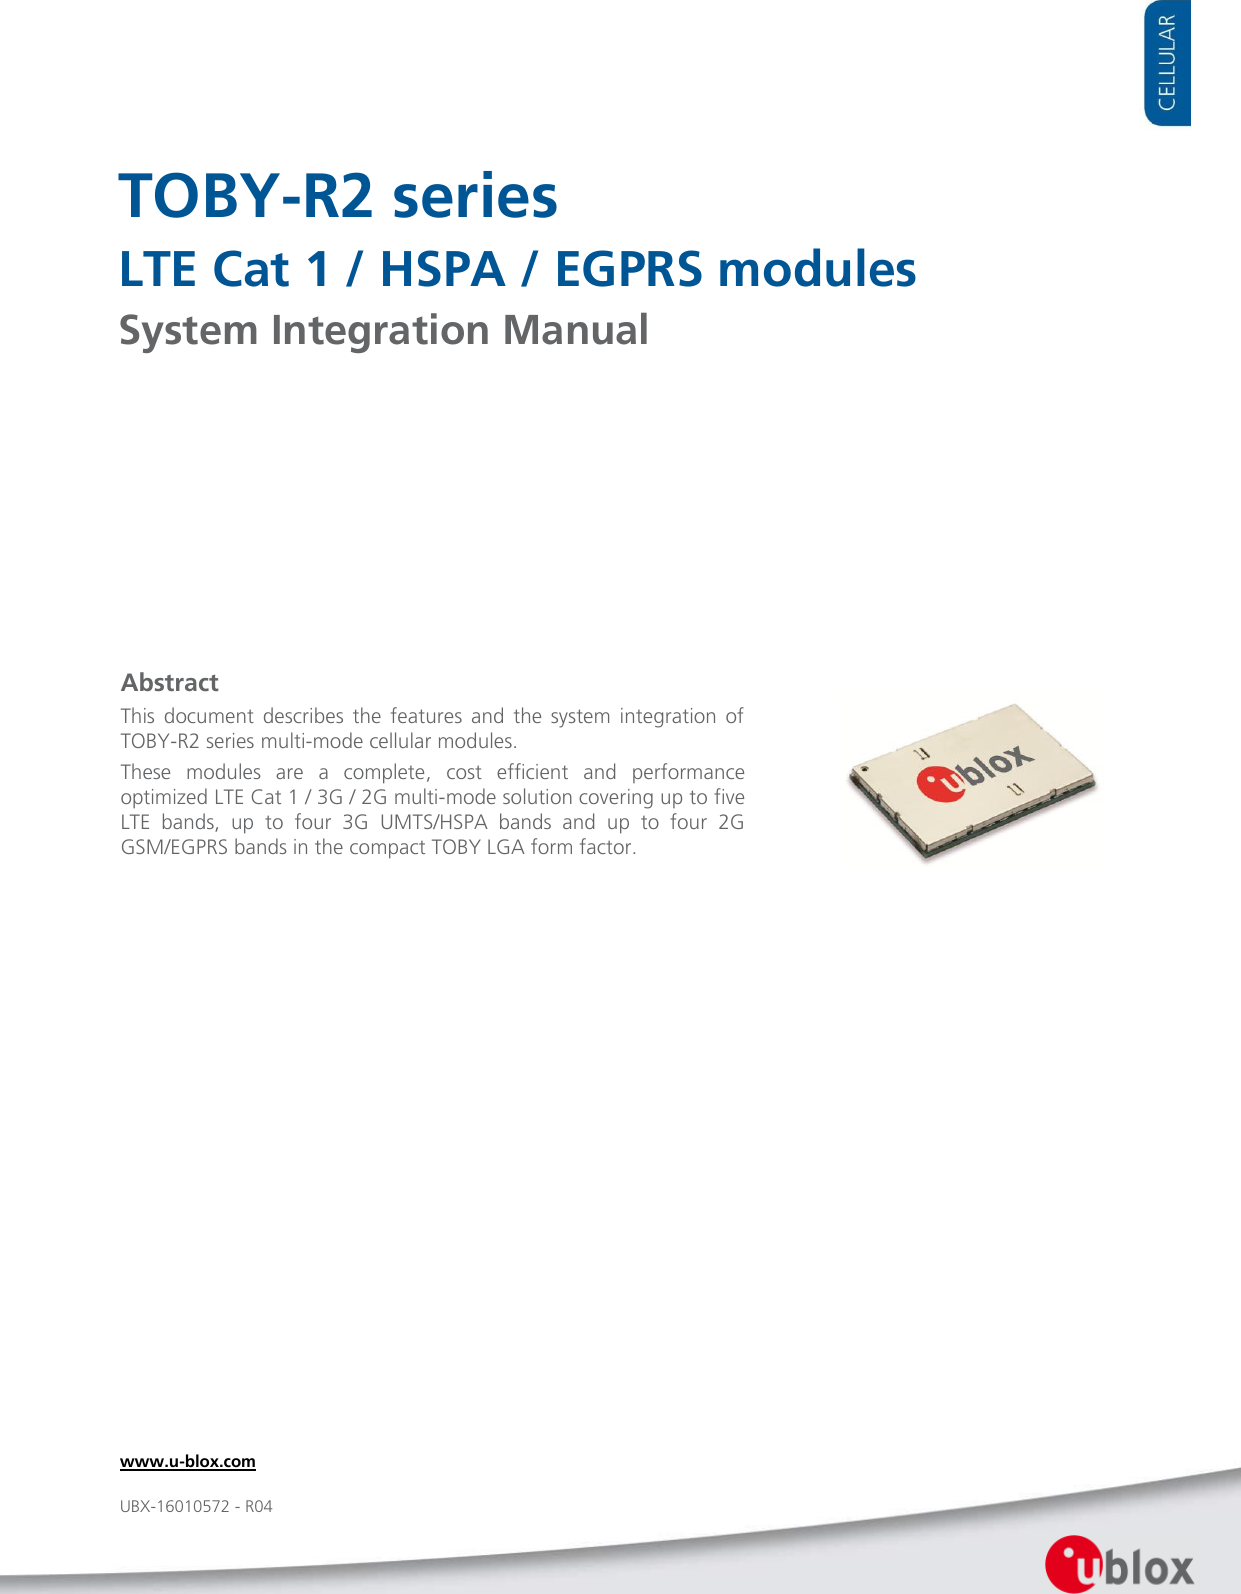     TOBY-R2 series LTE Cat 1 / HSPA / EGPRS modules System Integration Manual               Abstract This  document  describes  the  features  and  the  system  integration  of TOBY-R2 series multi-mode cellular modules. These  modules  are  a  complete,  cost  efficient  and  performance optimized LTE Cat 1 / 3G / 2G multi-mode solution covering up to five LTE  bands,  up  to  four  3G  UMTS/HSPA  bands  and  up  to  four  2G GSM/EGPRS bands in the compact TOBY LGA form factor. www.u-blox.com UBX-16010572 - R04 